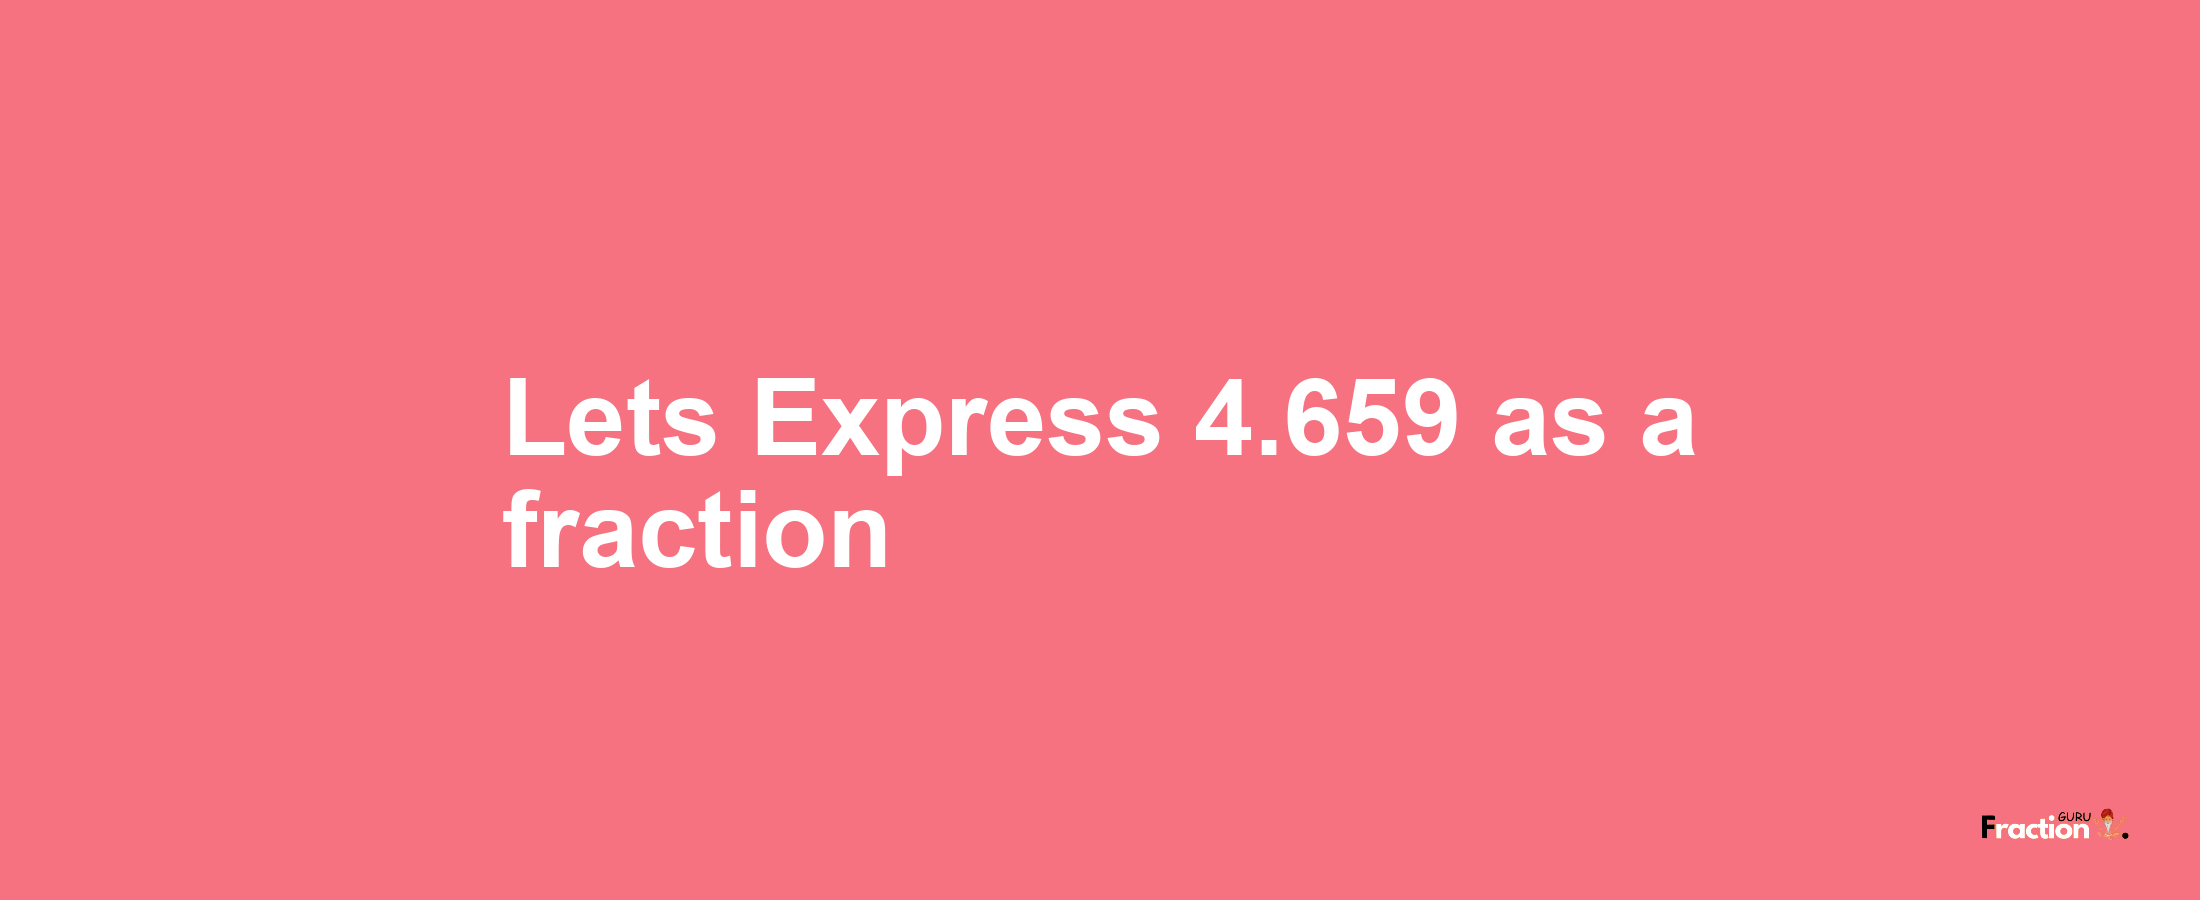 Lets Express 4.659 as afraction